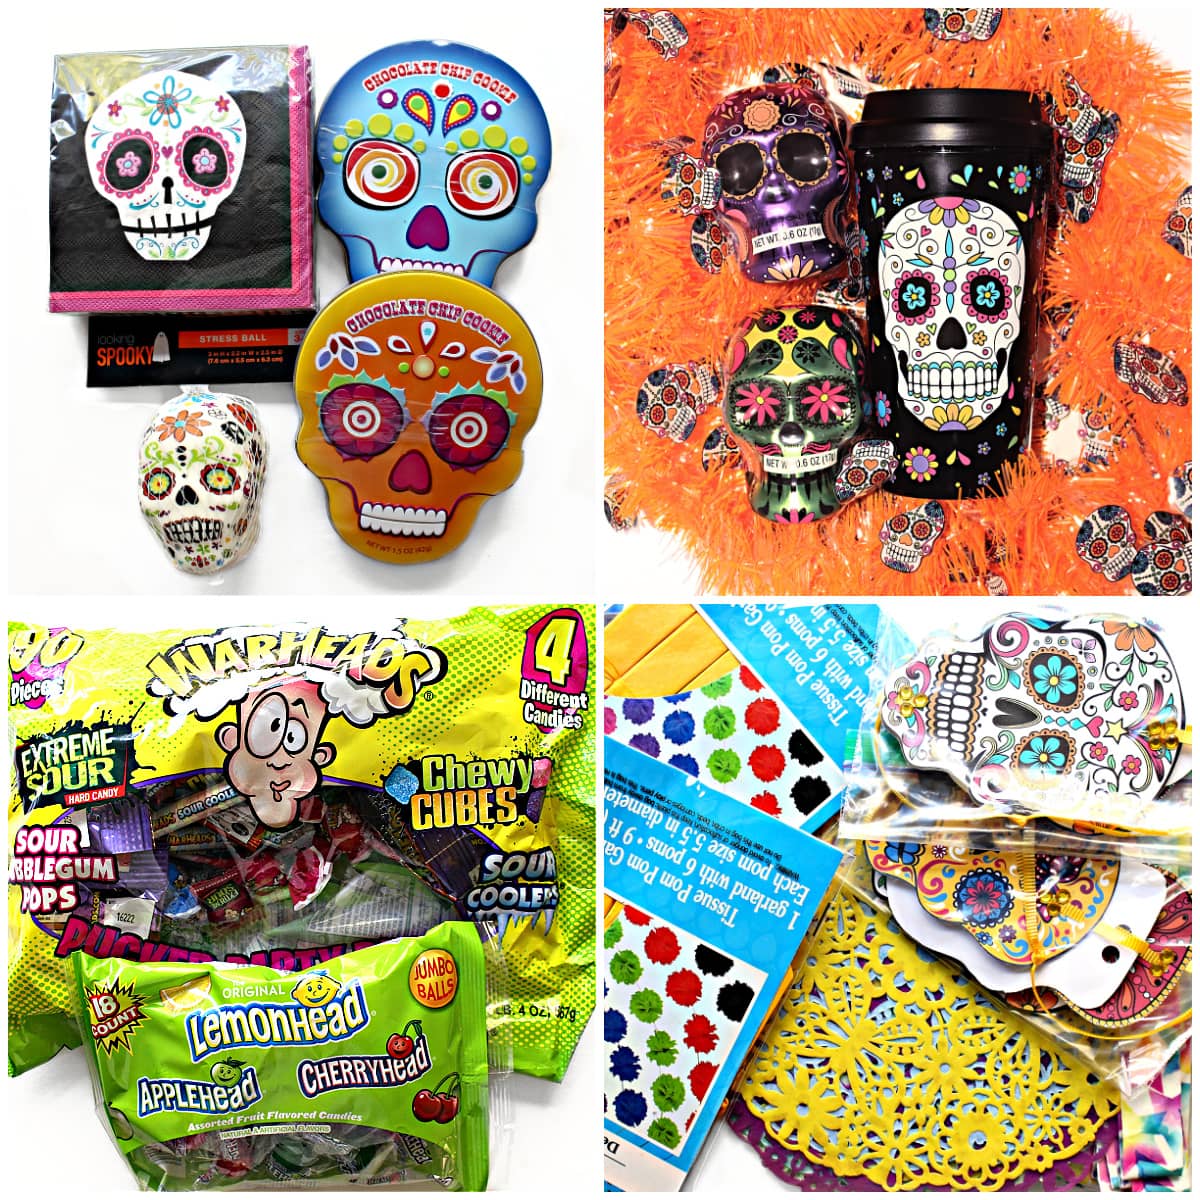 Care package contents: skull decorations and paper goods, candy, decorations.